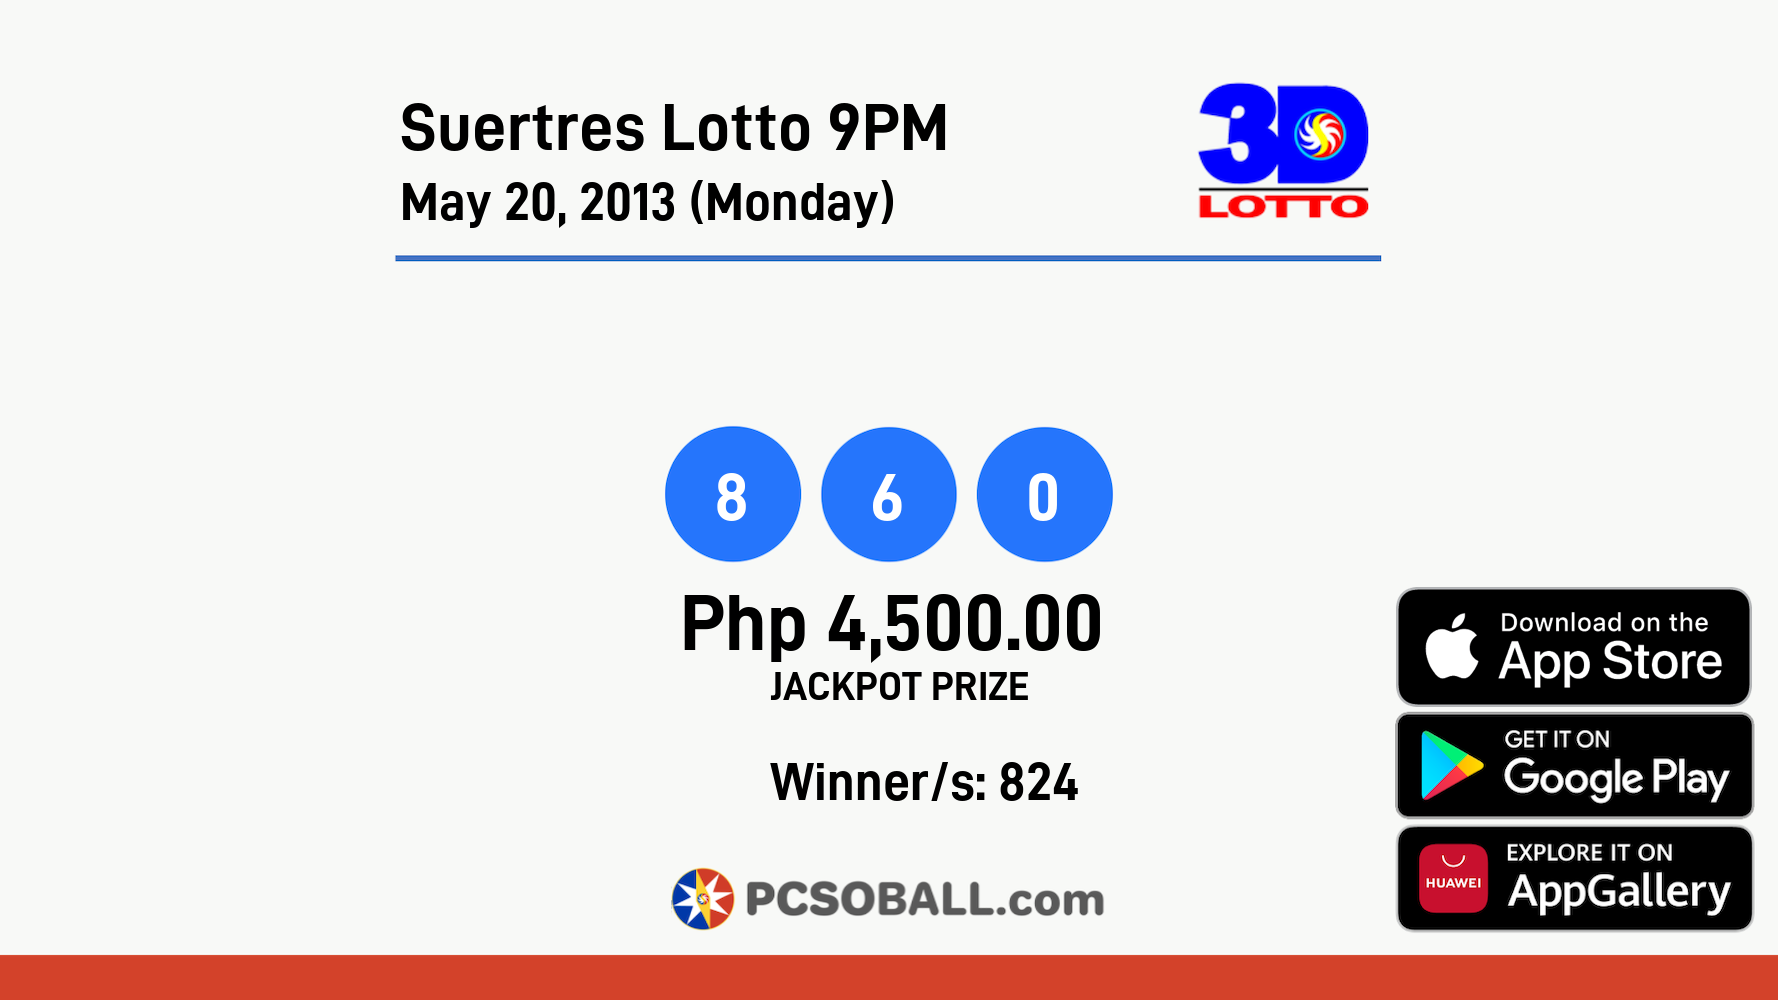 Suertres Lotto 9PM May 20, 2013 (Monday) Result